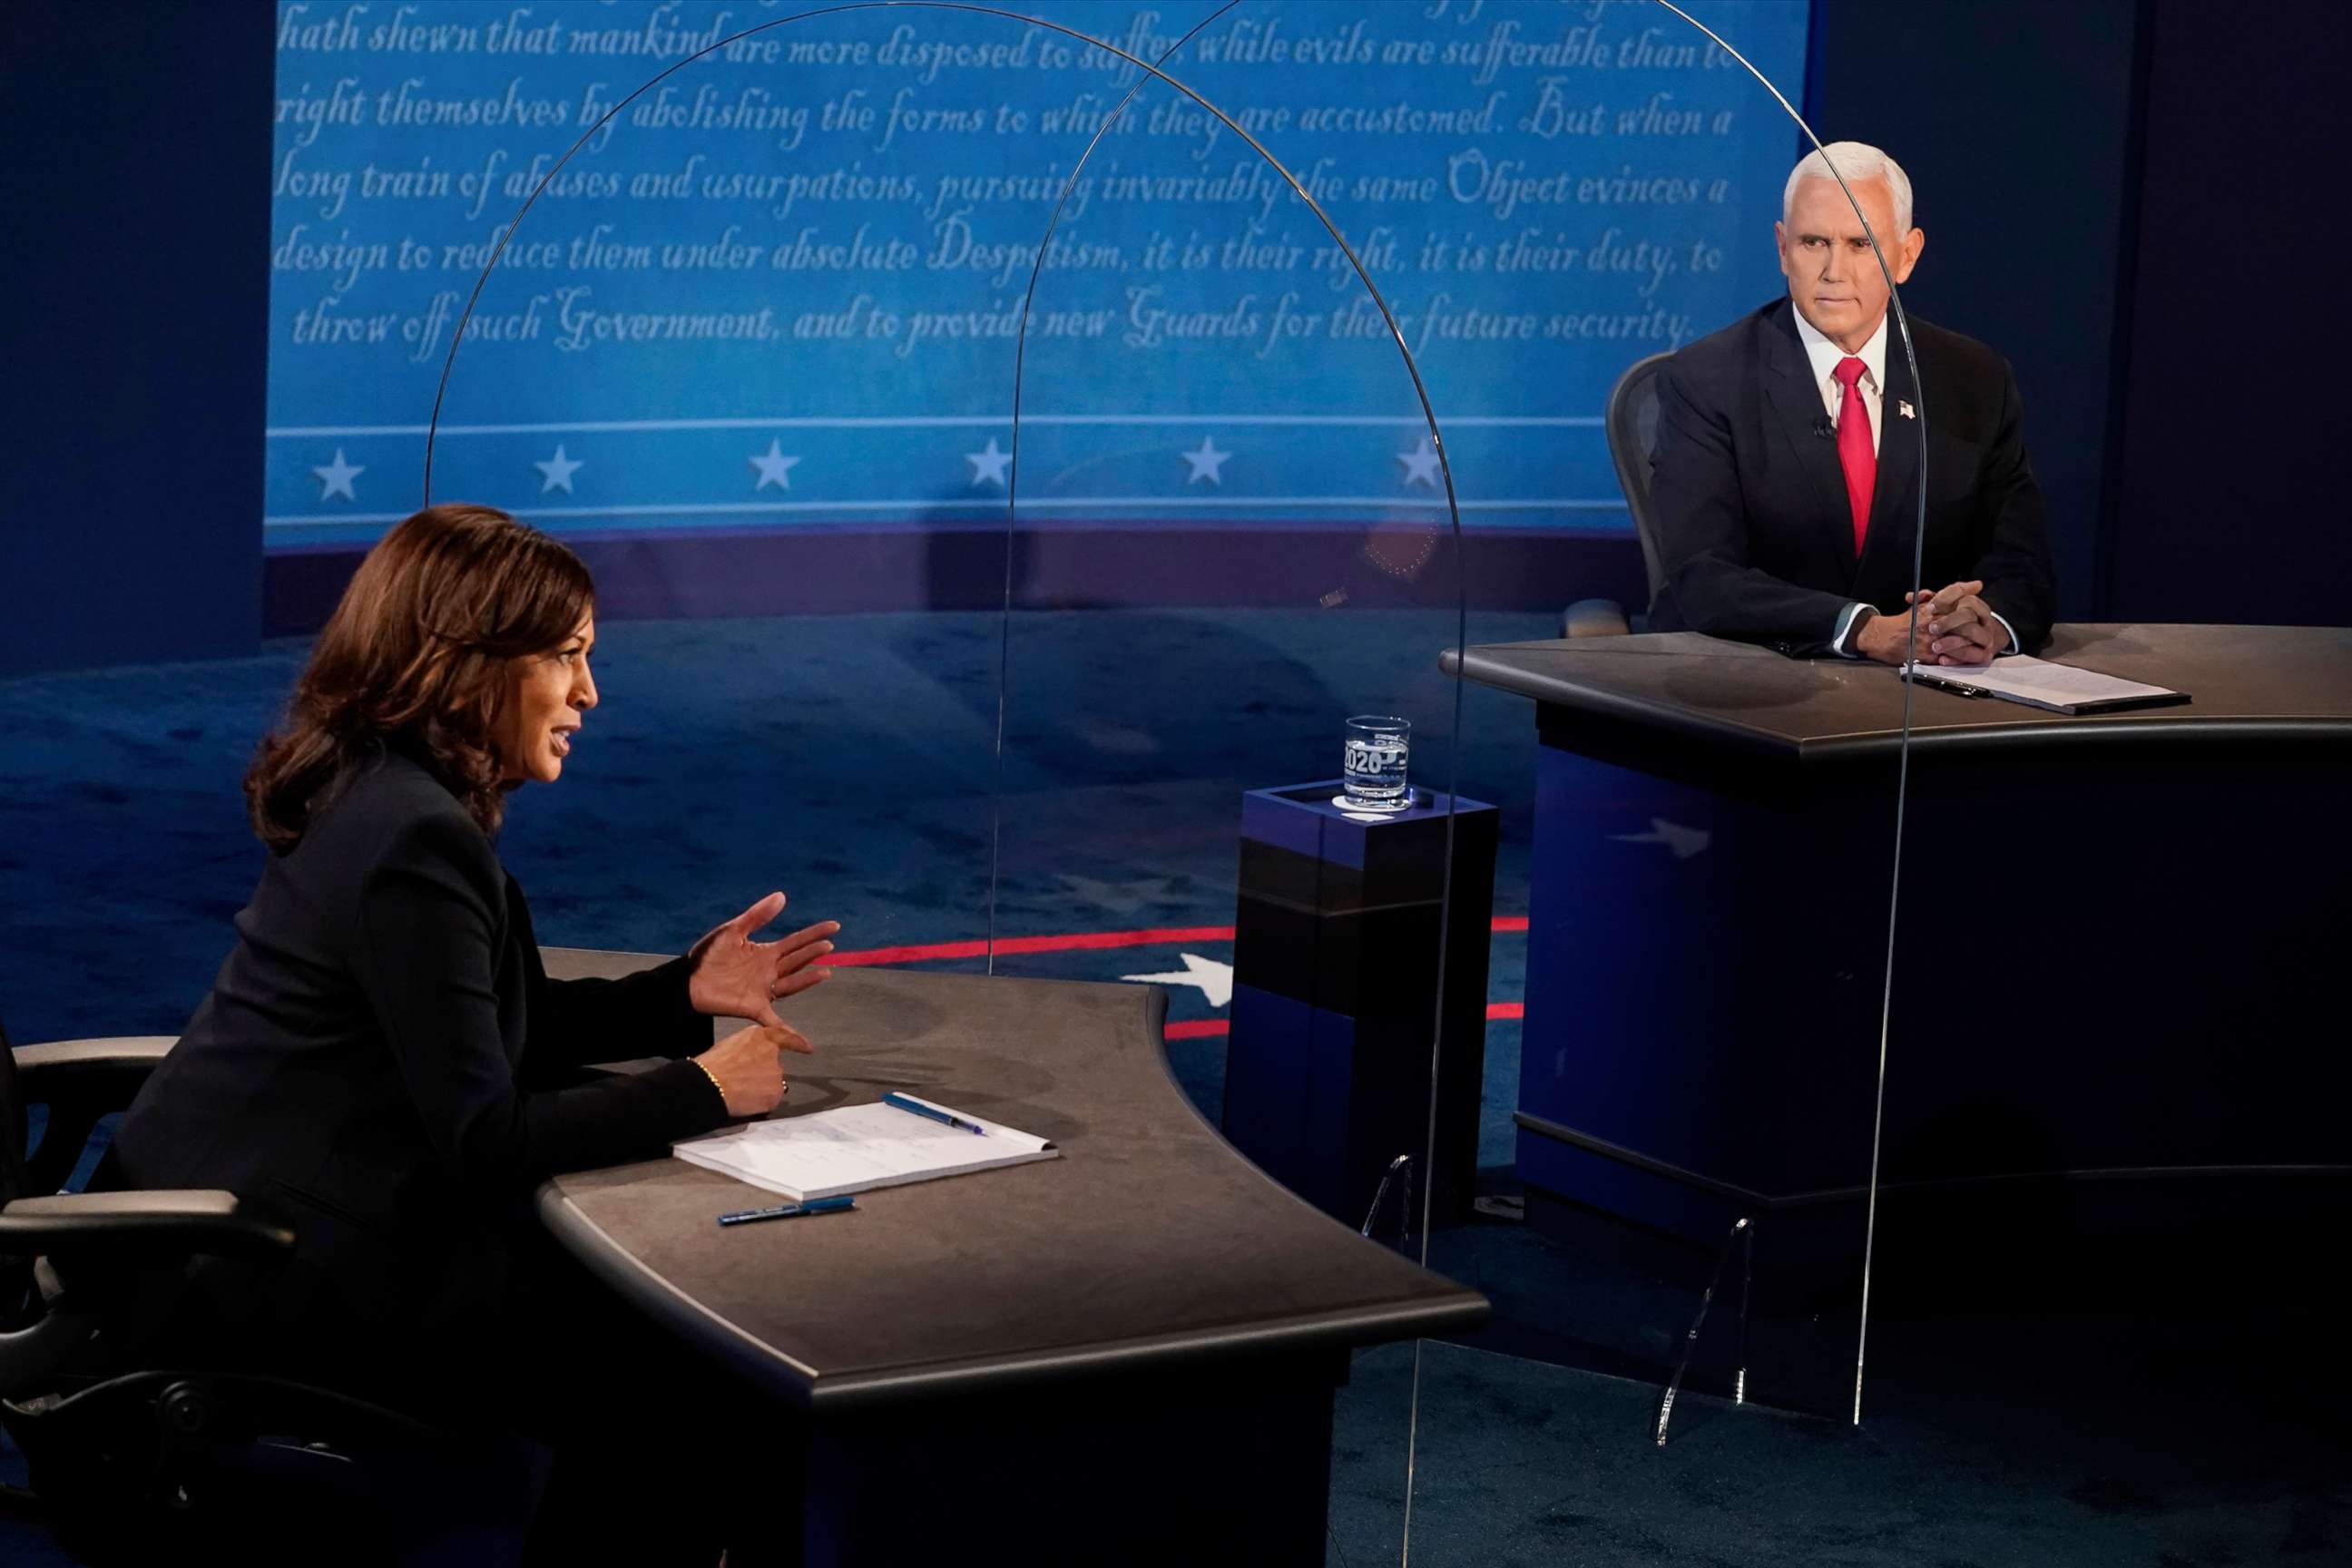 PHOTO: Vice President Mike Pence looks at Democratic vice presidential candidate Sen. Kamala Harris, as she answers a question during the vice presidential debate, Oct. 7, 2020, at the University of Utah in Salt Lake City.